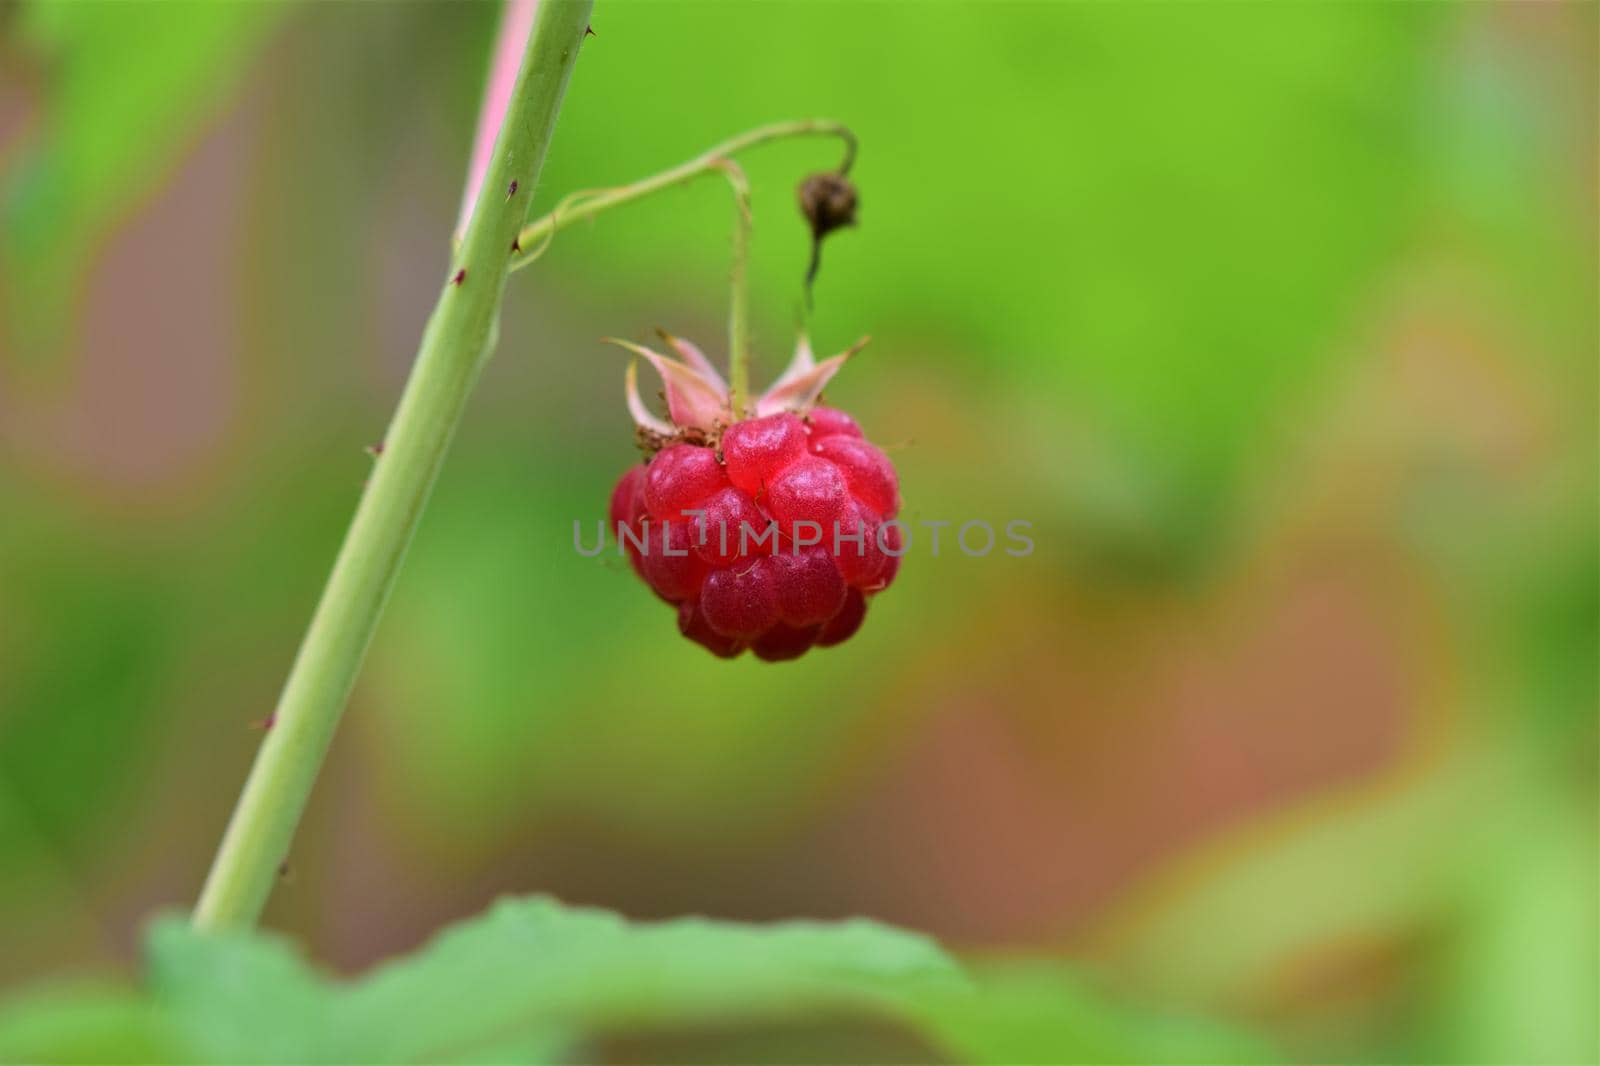 Ripe red raspberry as a close up against a blurred background by Luise123